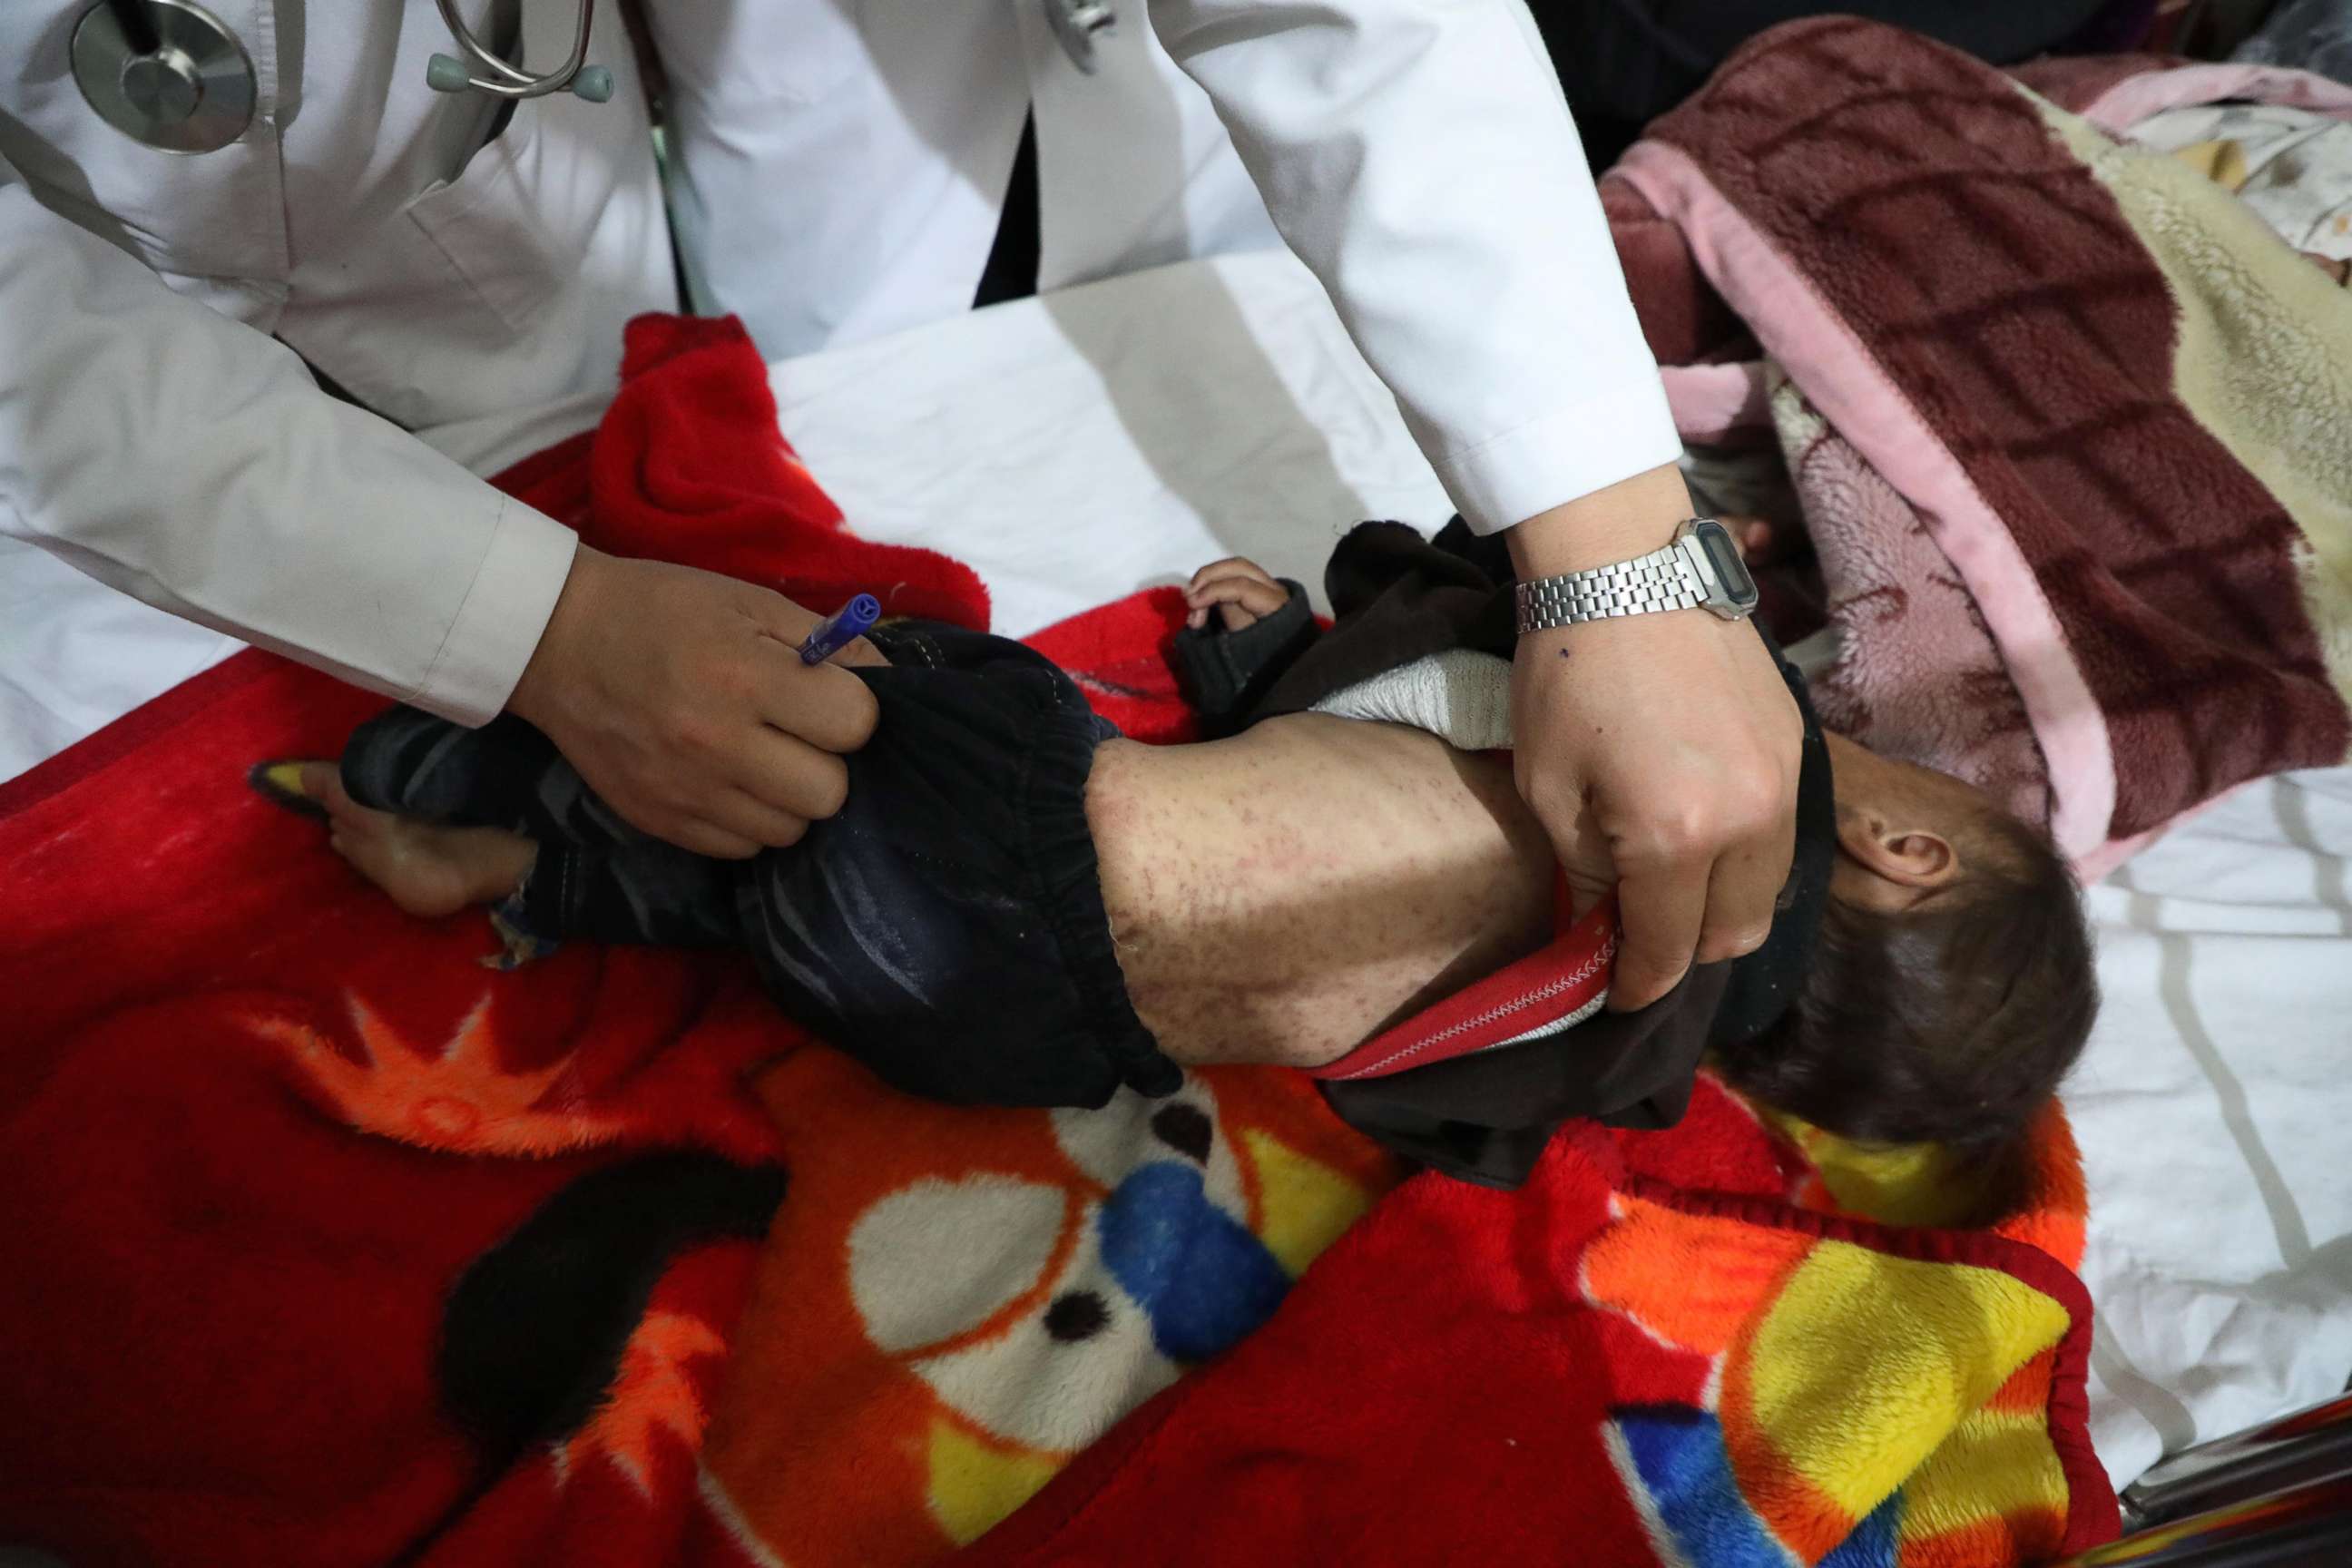 PHOTO: A child is examined by medical staff, in capital Kabul, Afghanistan, April 18, 2022.